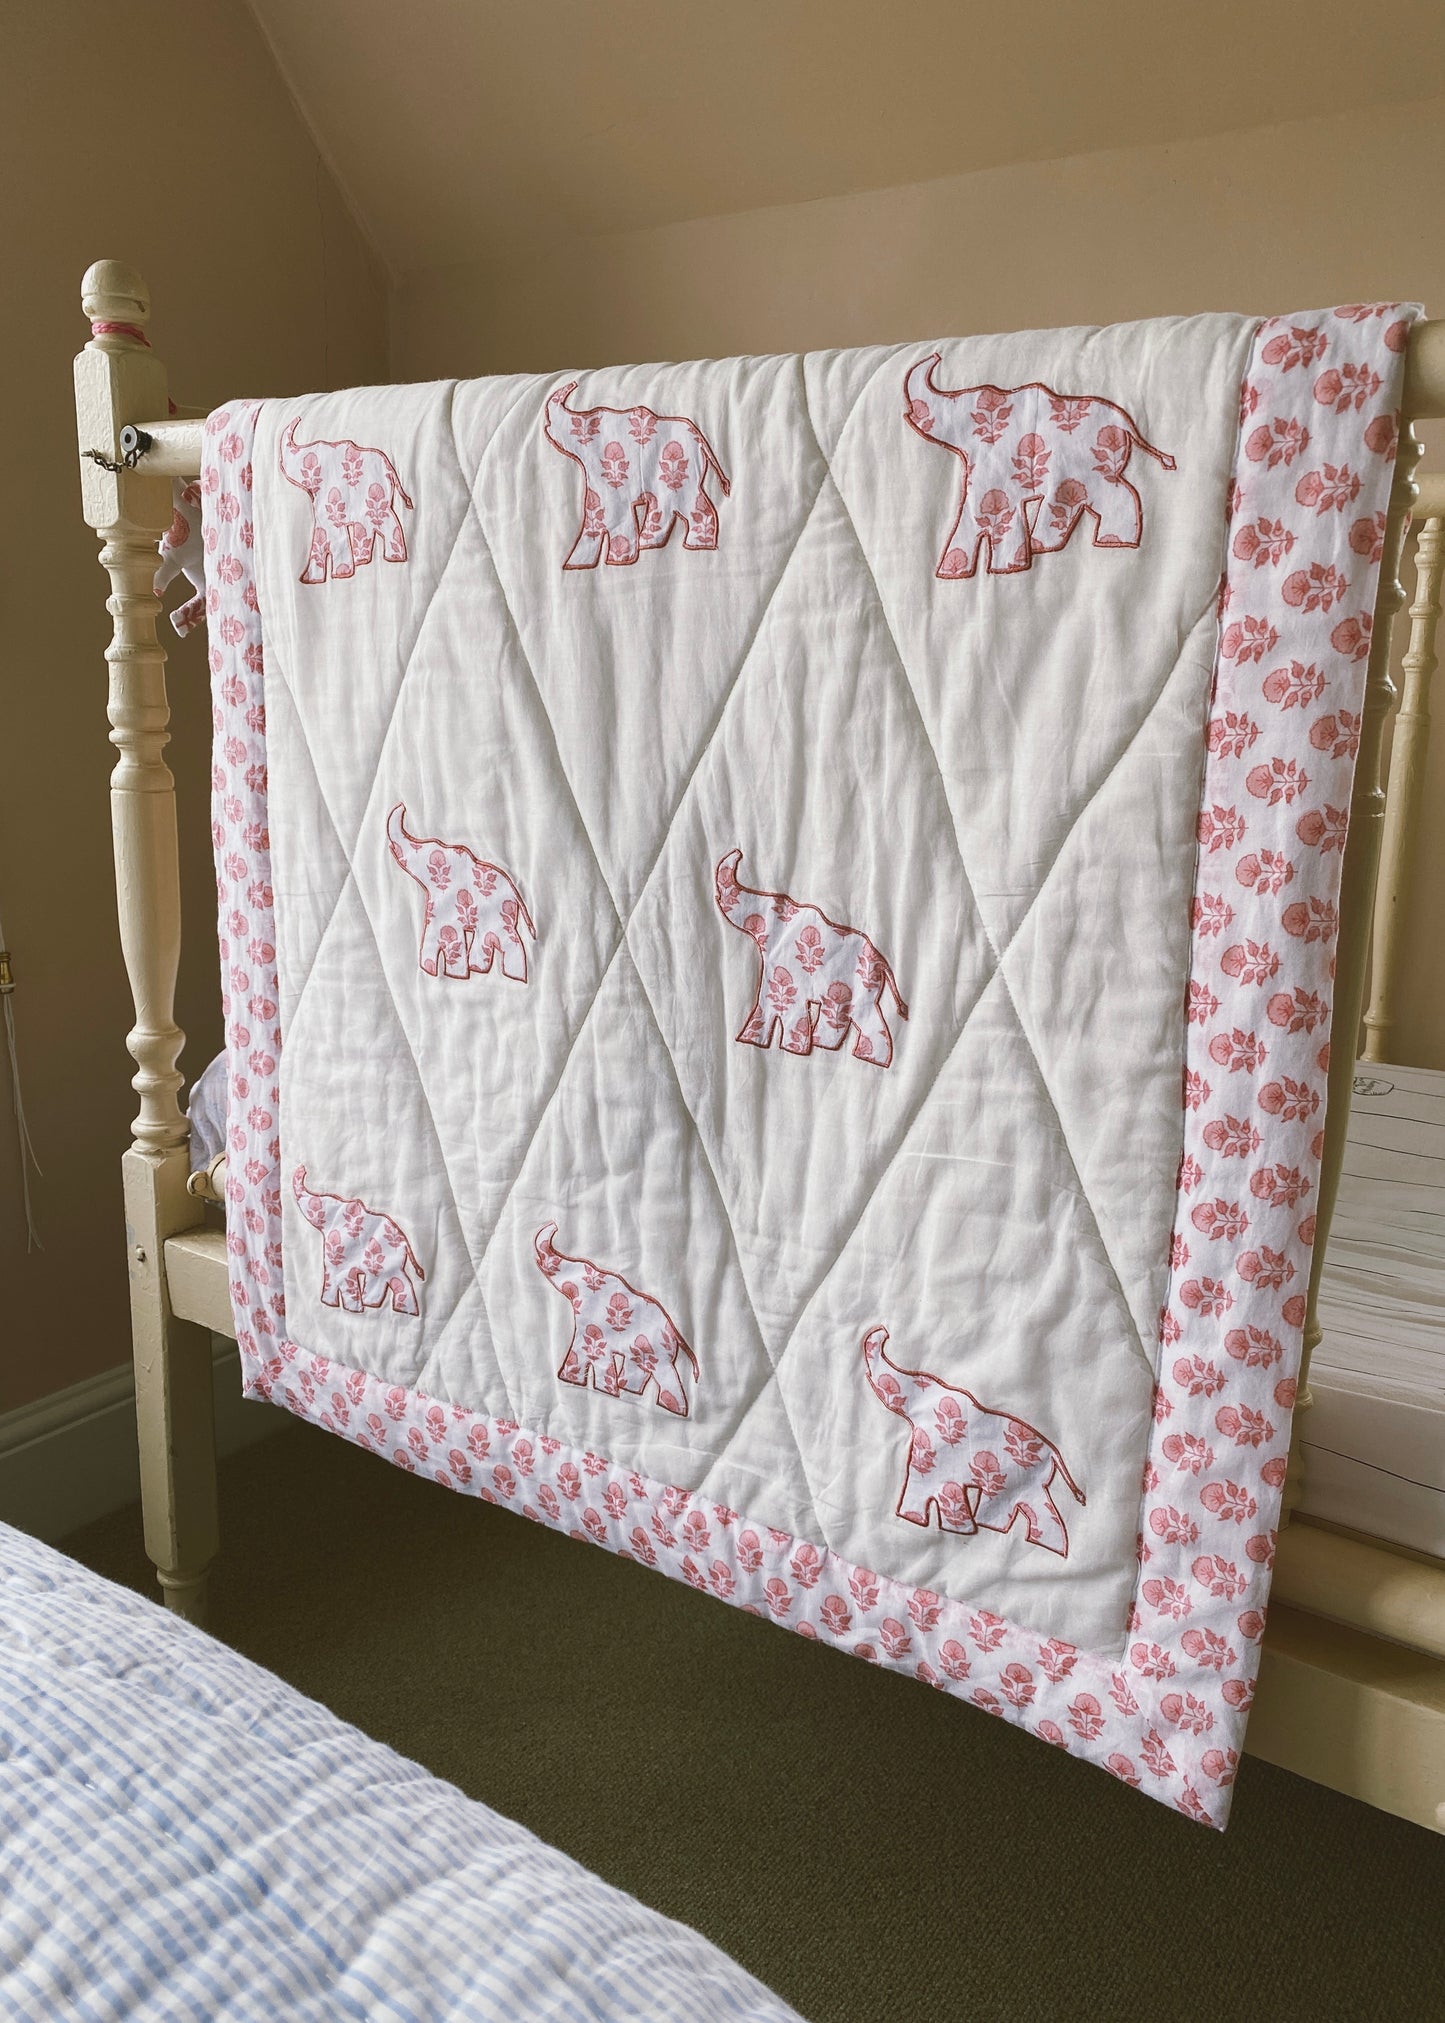 Pink Elephant Baby Quilt